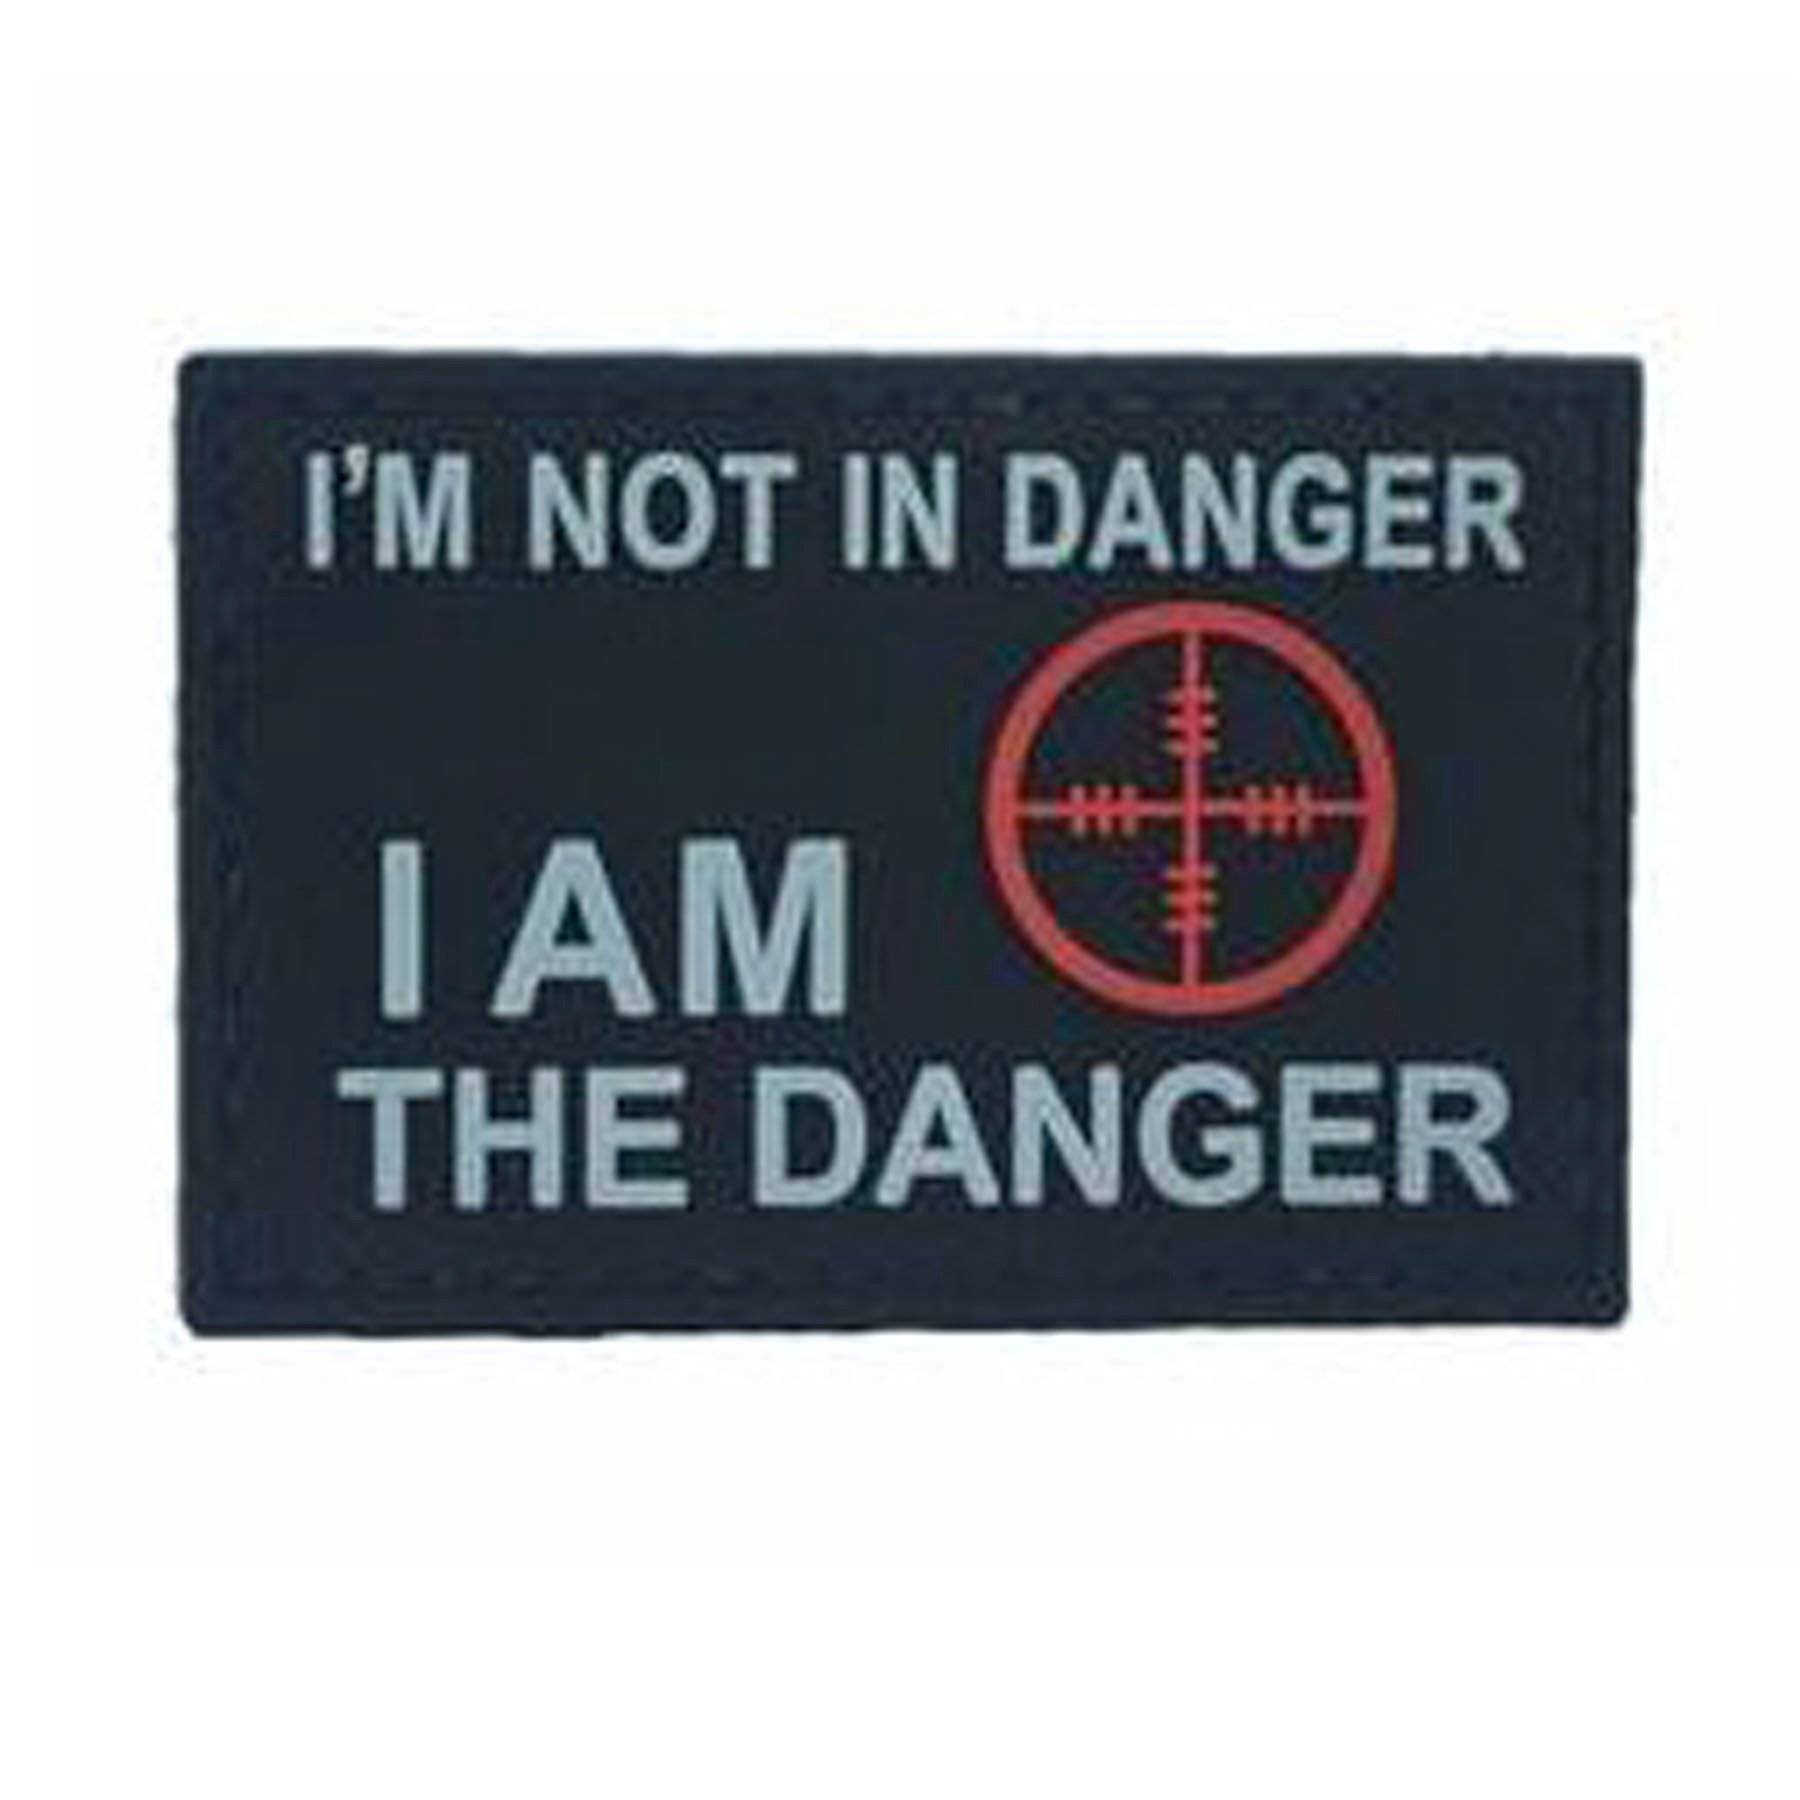 PFI Fashions Neo Tactical I Am the Danger PVC Morale Patch